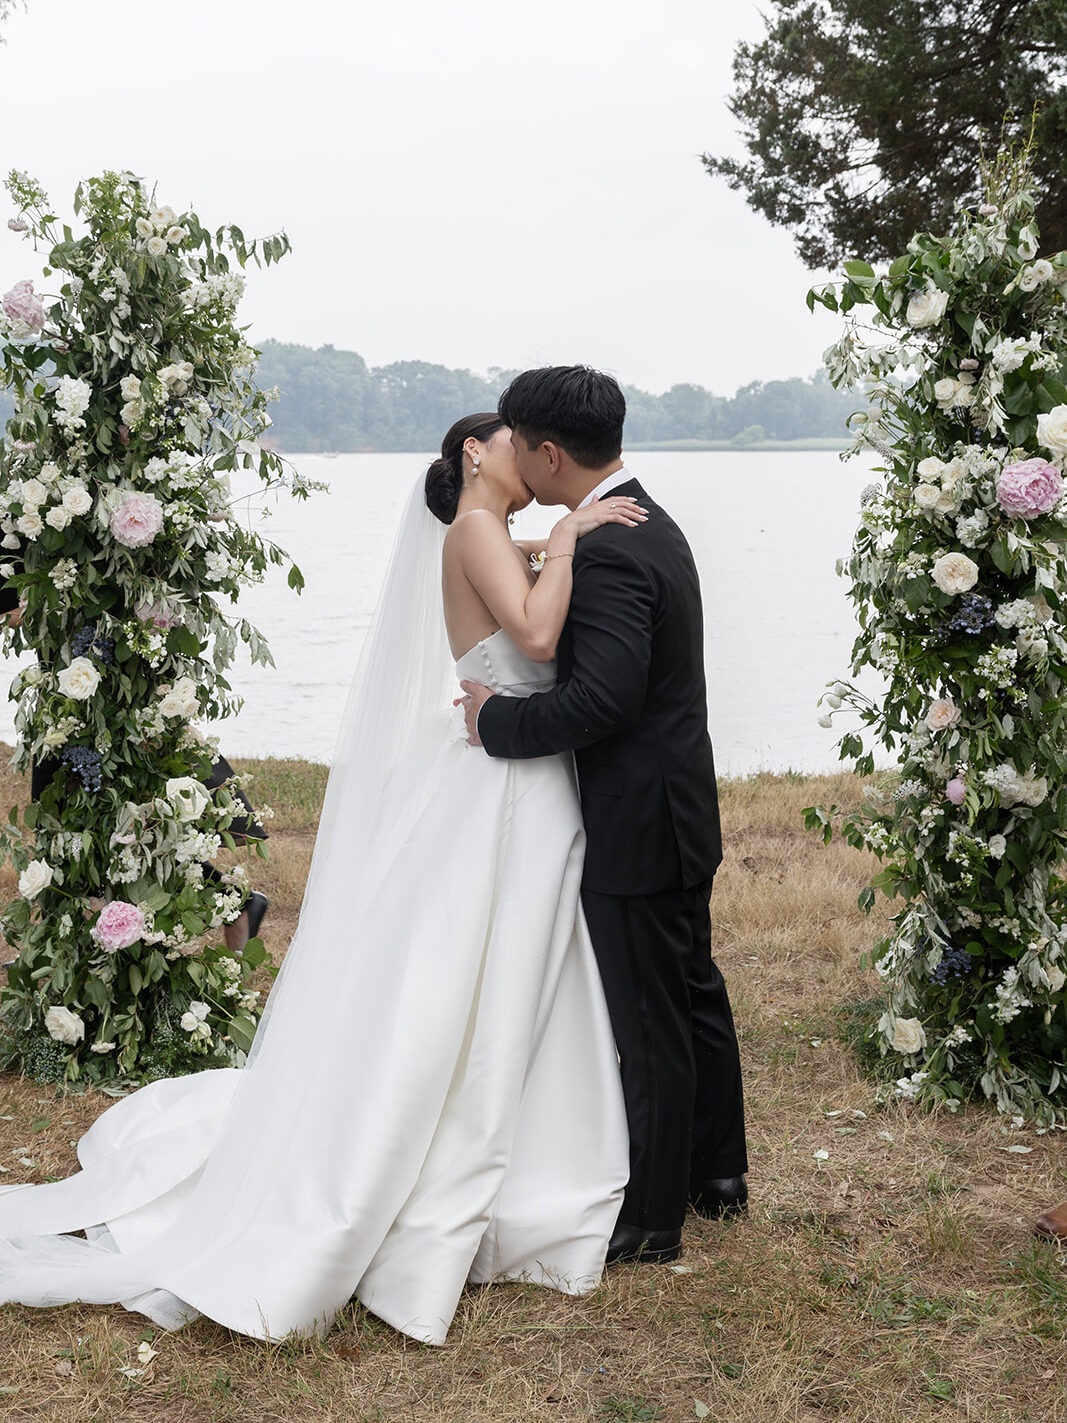 Bride and groom share their first kiss at the wedding altar